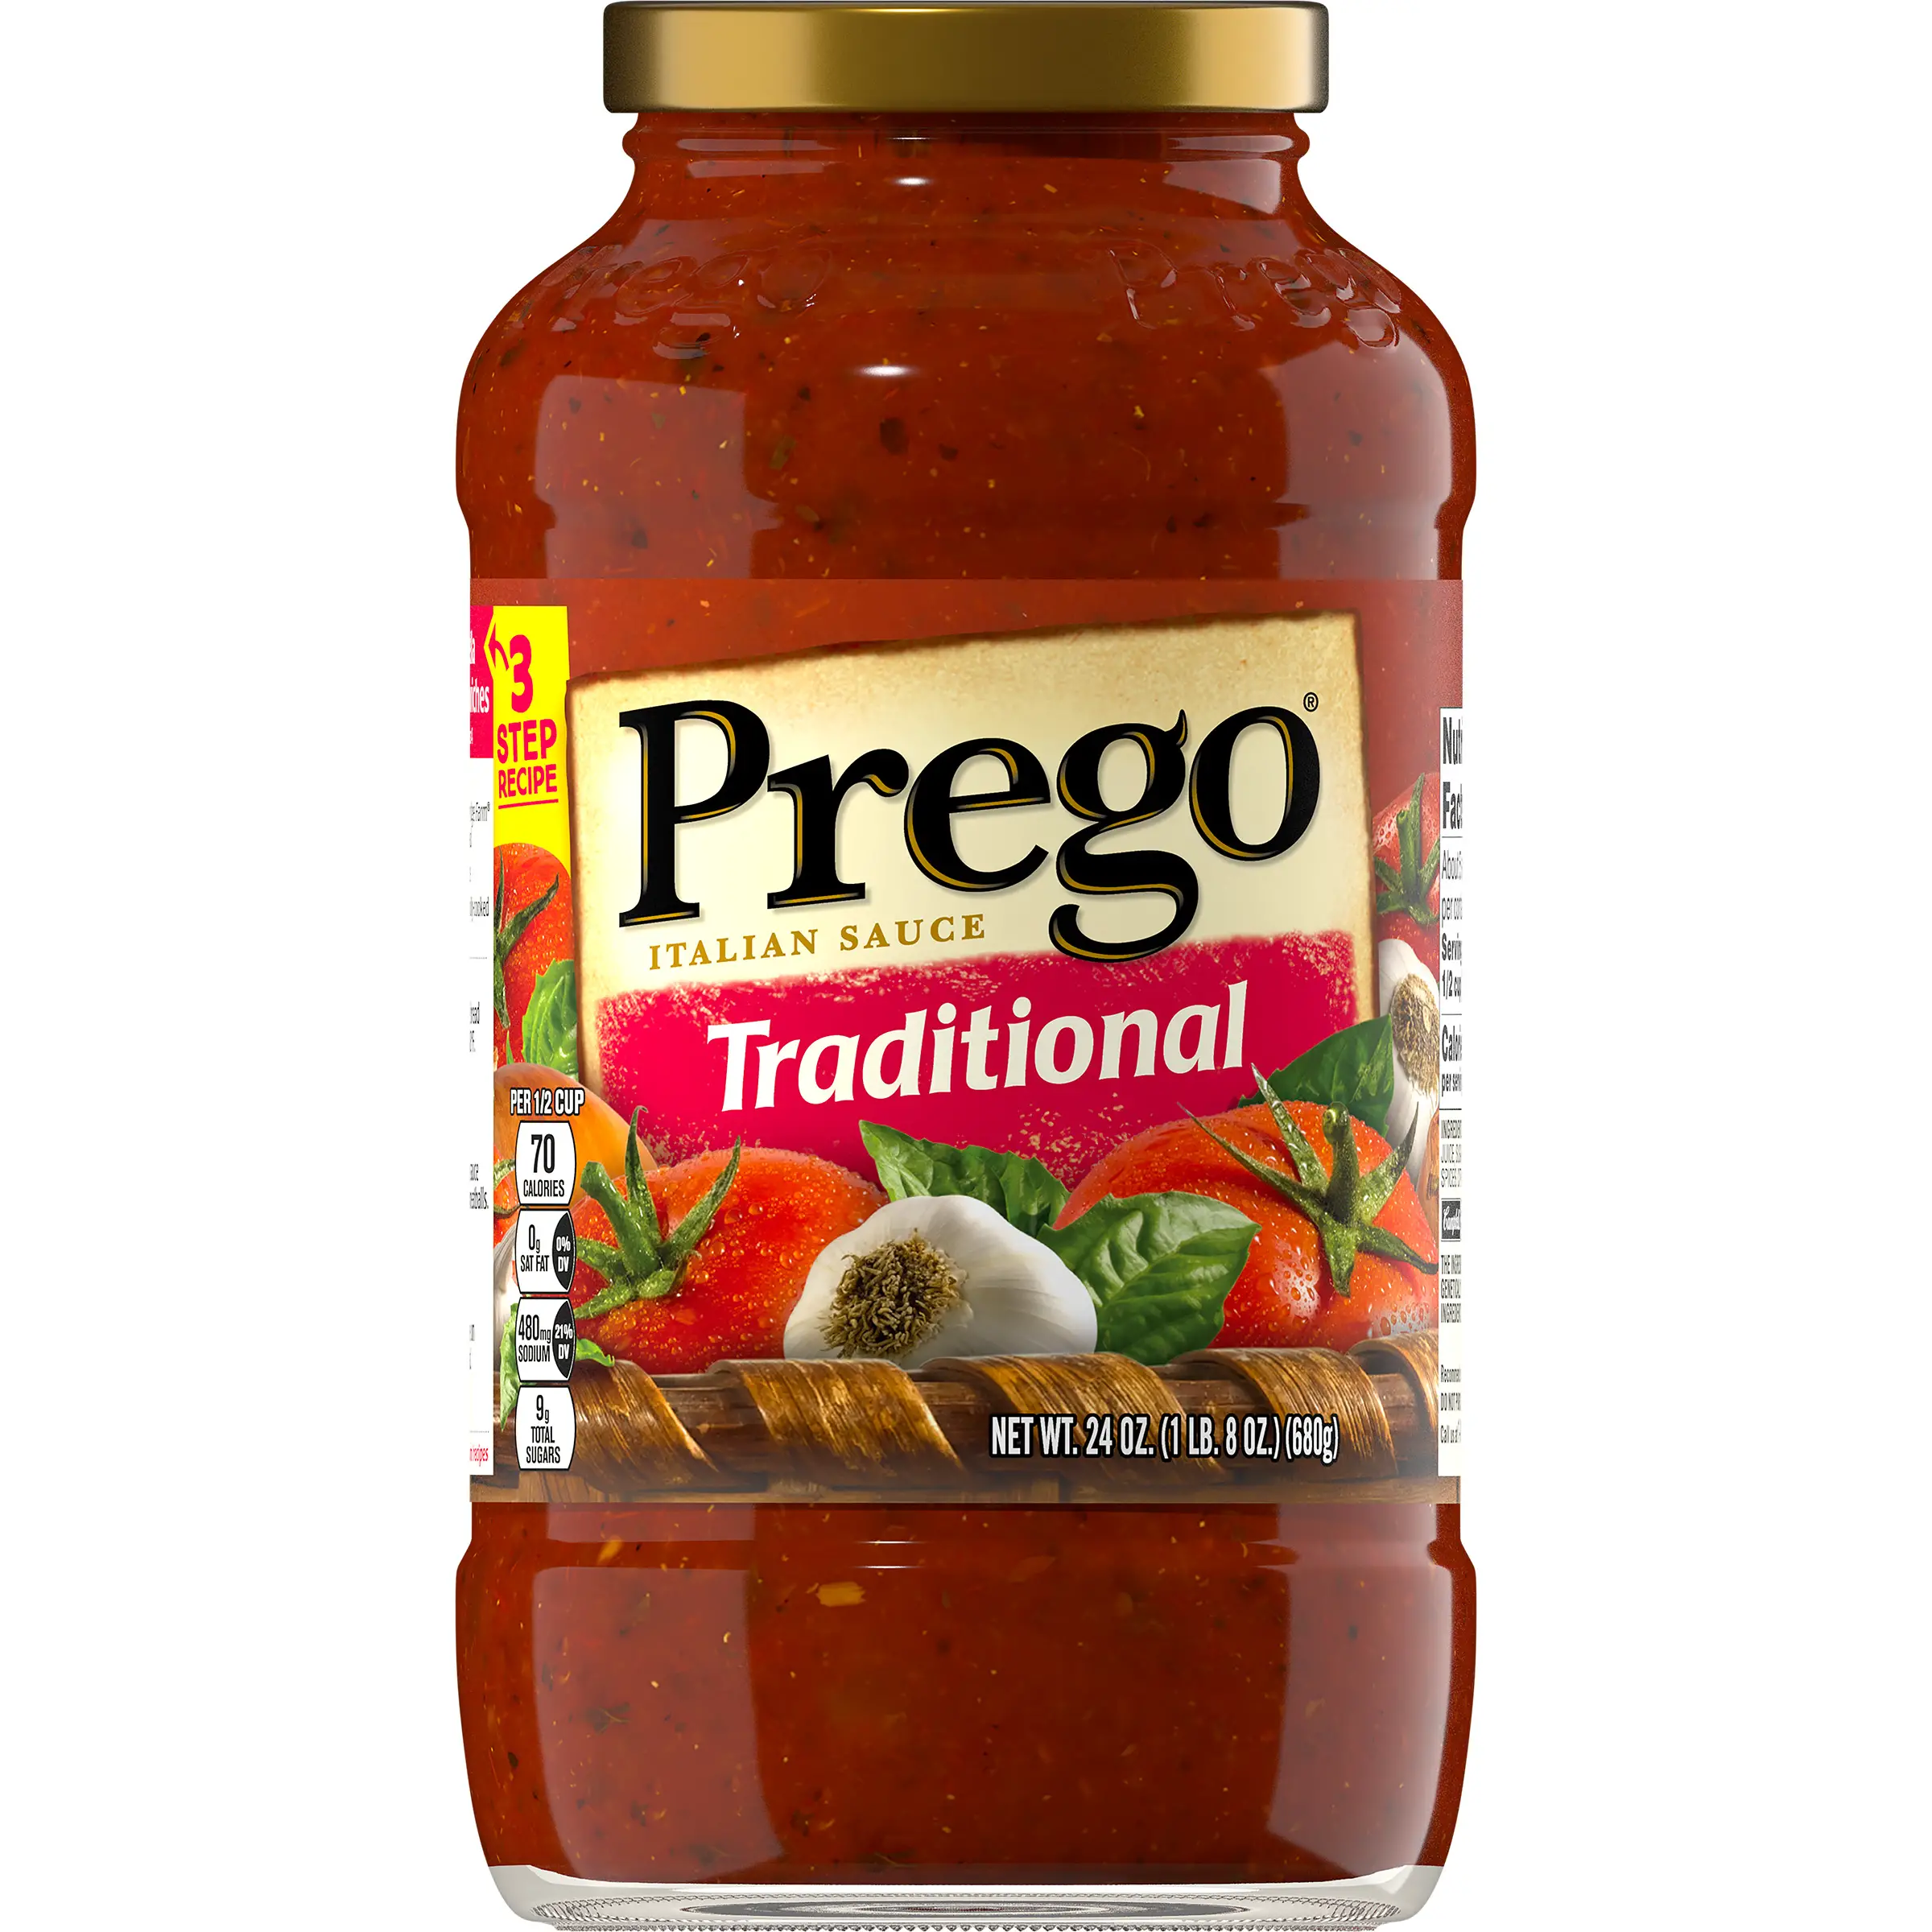 How To Make Spaghetti With Prego Sauce